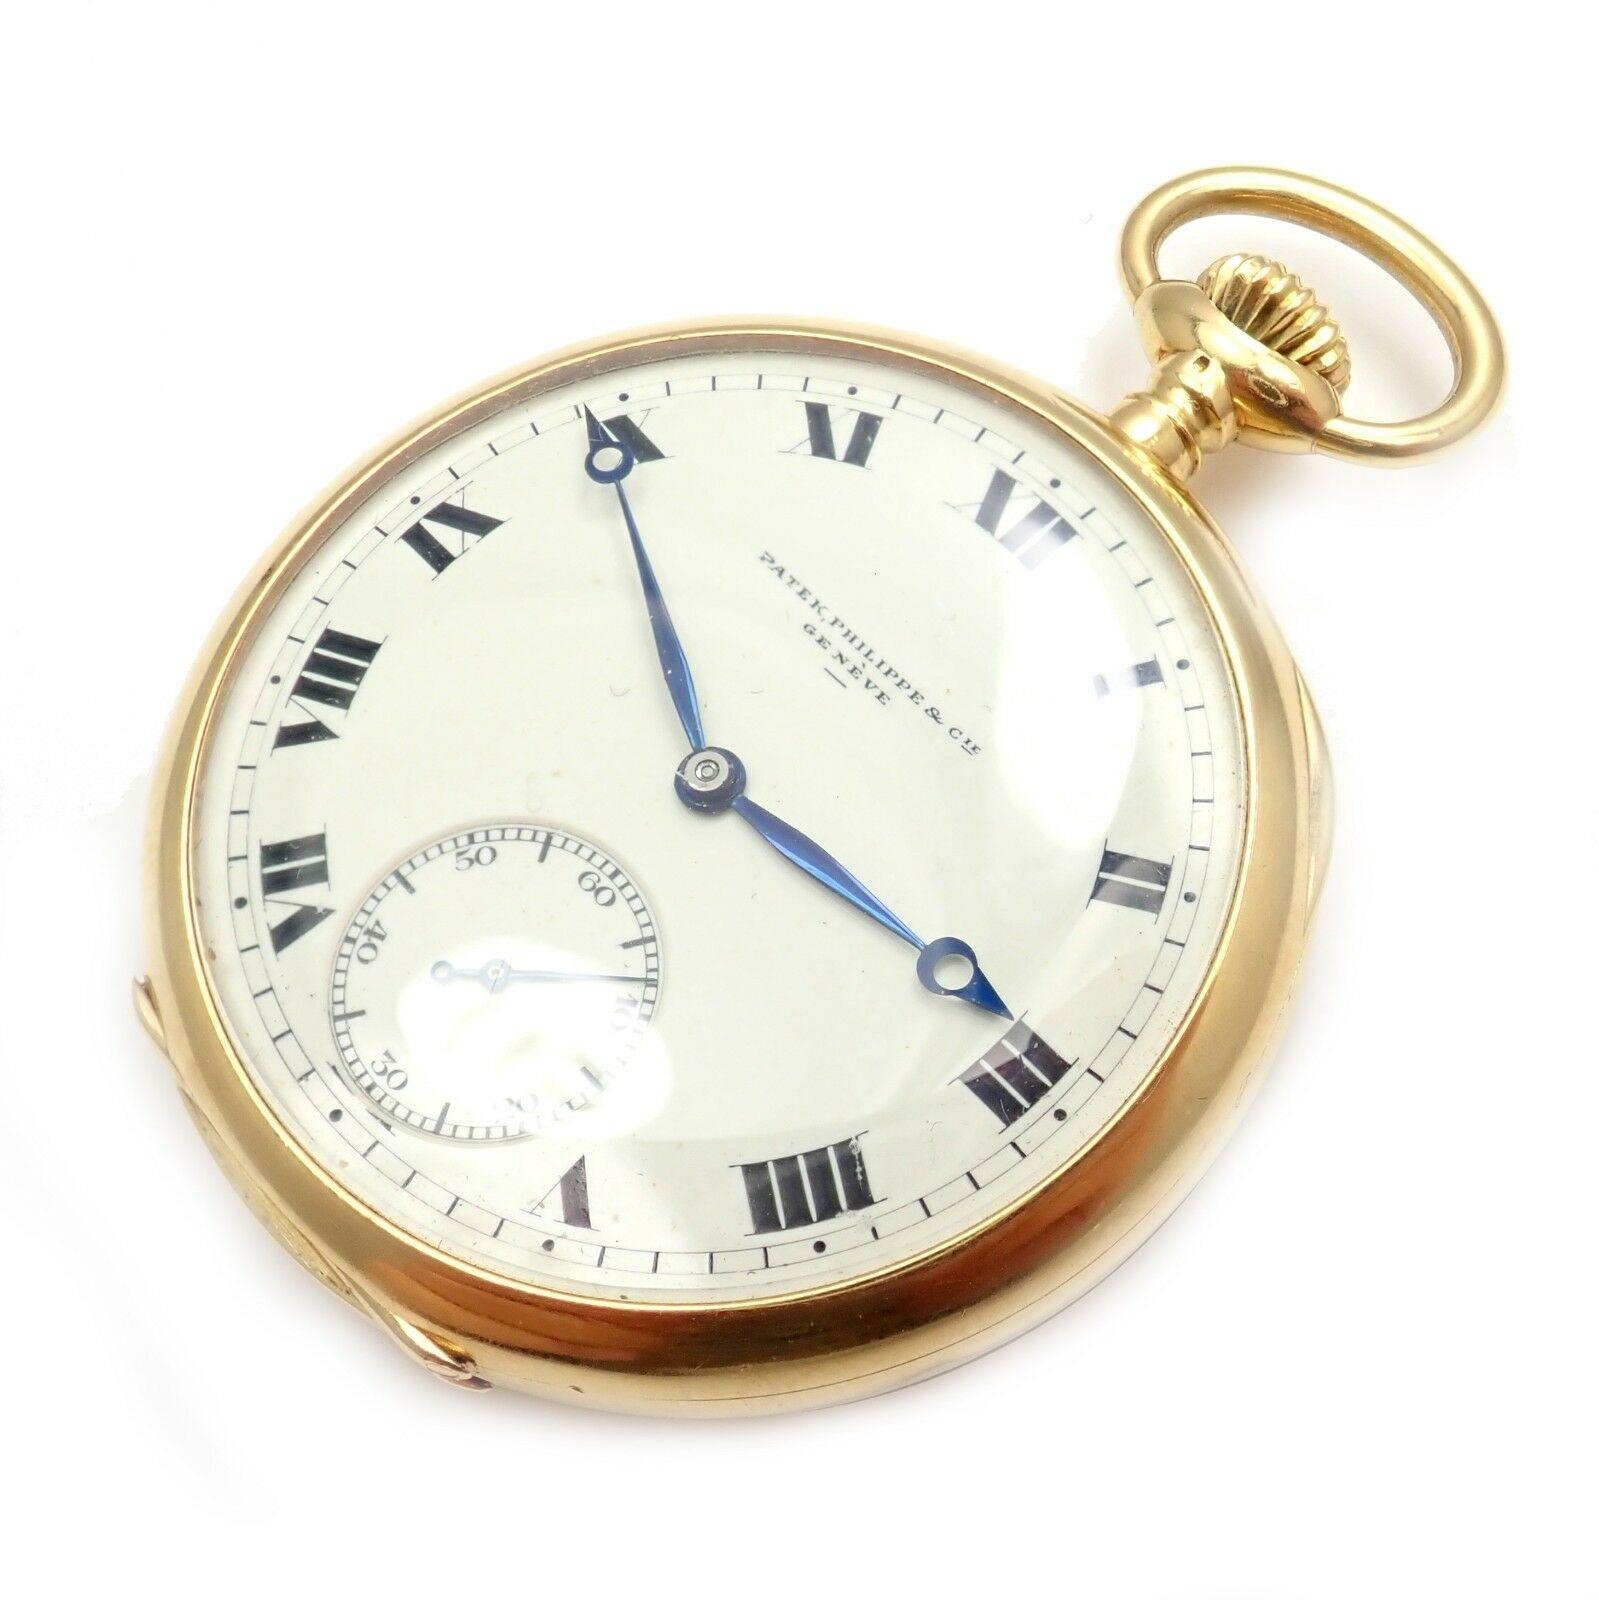 18k yellow gold triple signed pocket watch by Patek Philippe.
Works great, a must have.
Details:
Case Size: 46.5mm
Weight: 71.5 grams
Movement: Manual wind
Dial: Porcelain Dial
Stamped Hallmarks: Patek Philippe & Cie
Geneva Switzerland
PPco 18k